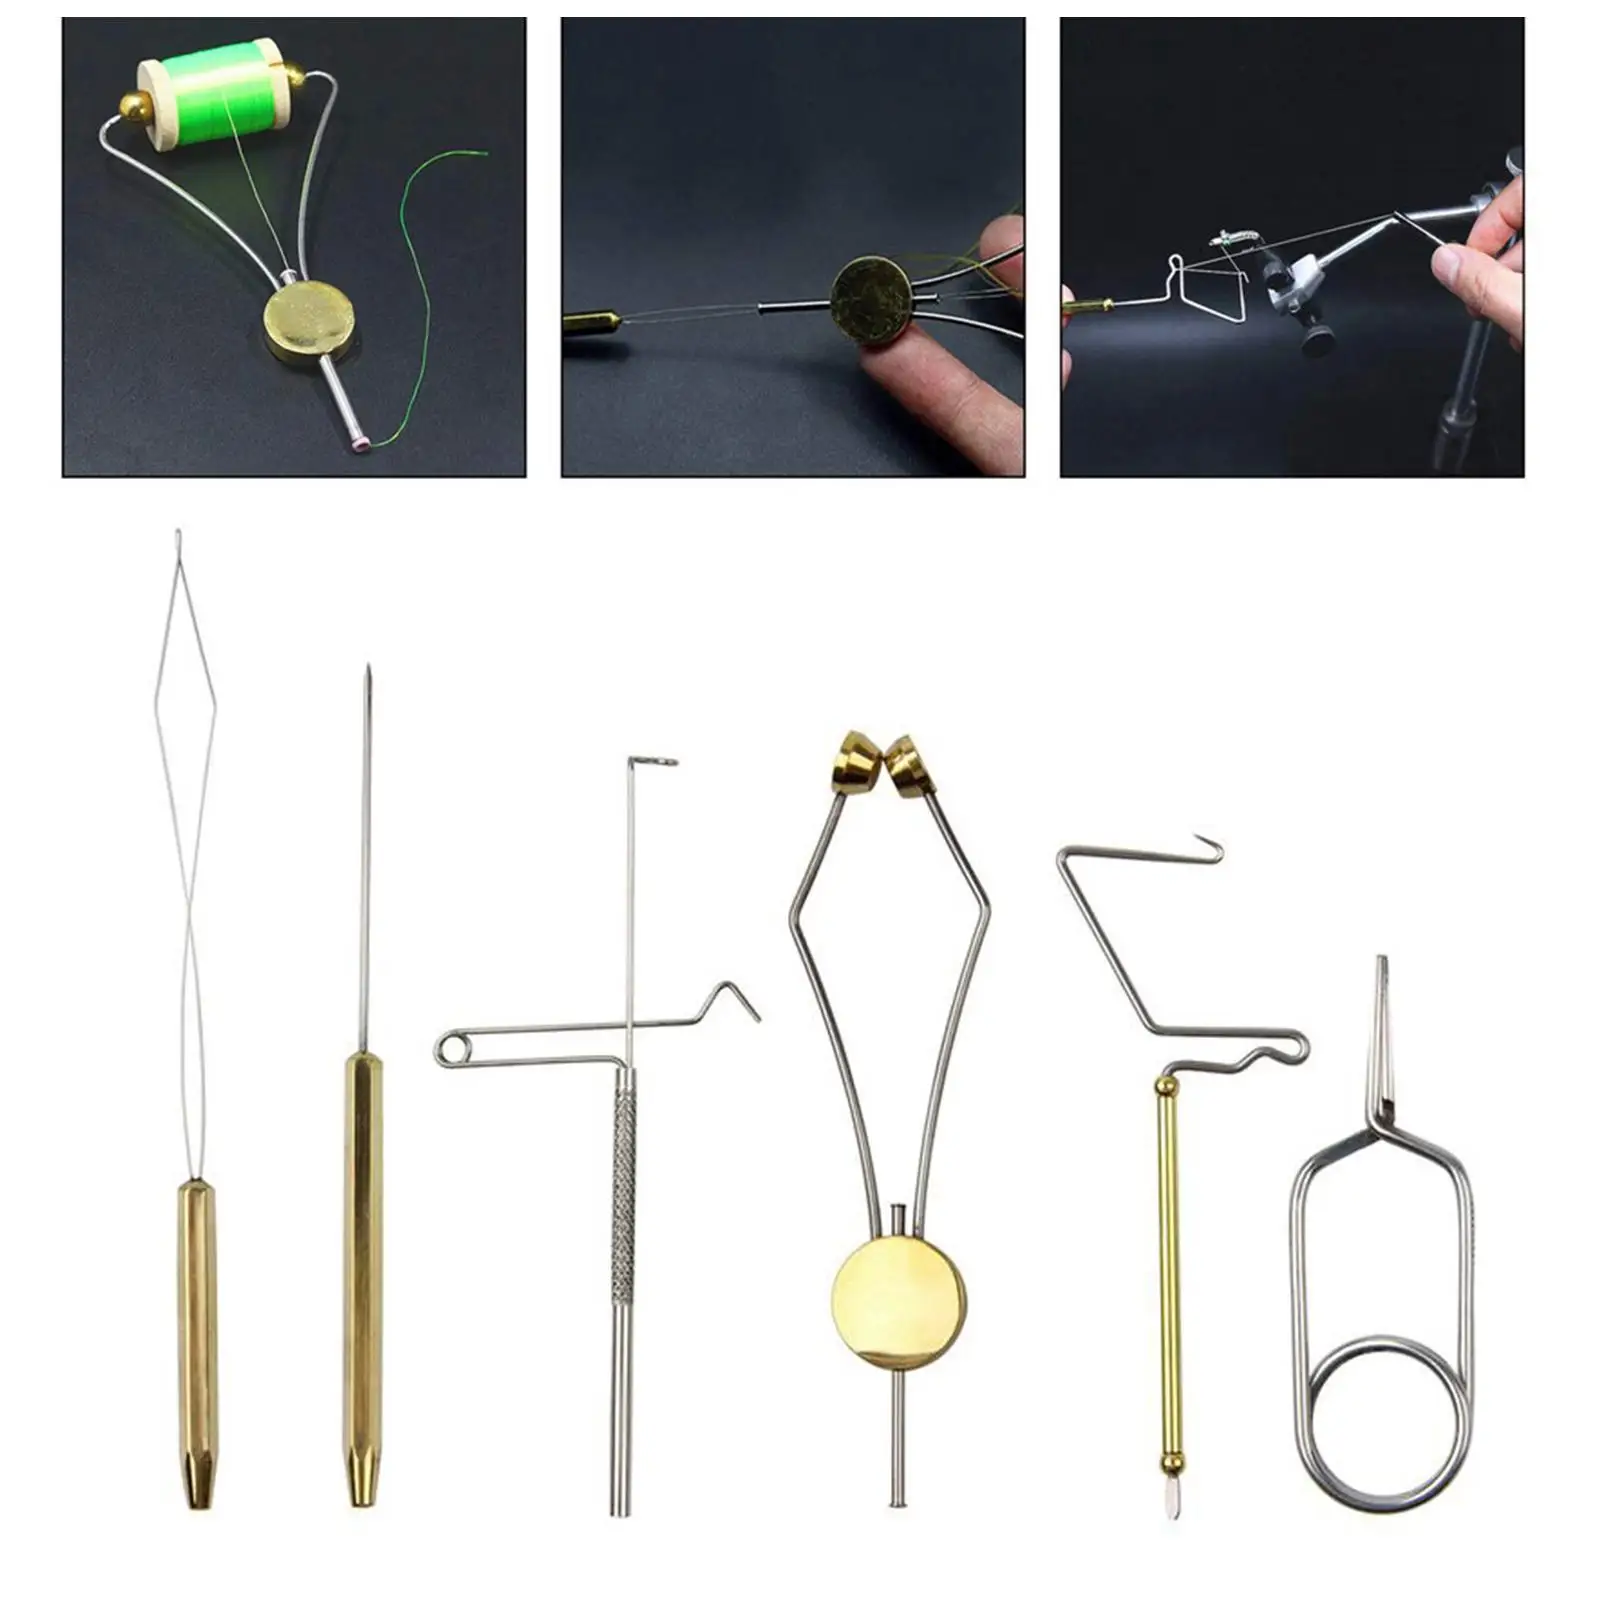 Fly Tying Vise Tools Kit C-Clamp Brass Rotary Whip Finisher Bobbin Thread Holder Set for Fly Fishing Hook Tying Tools